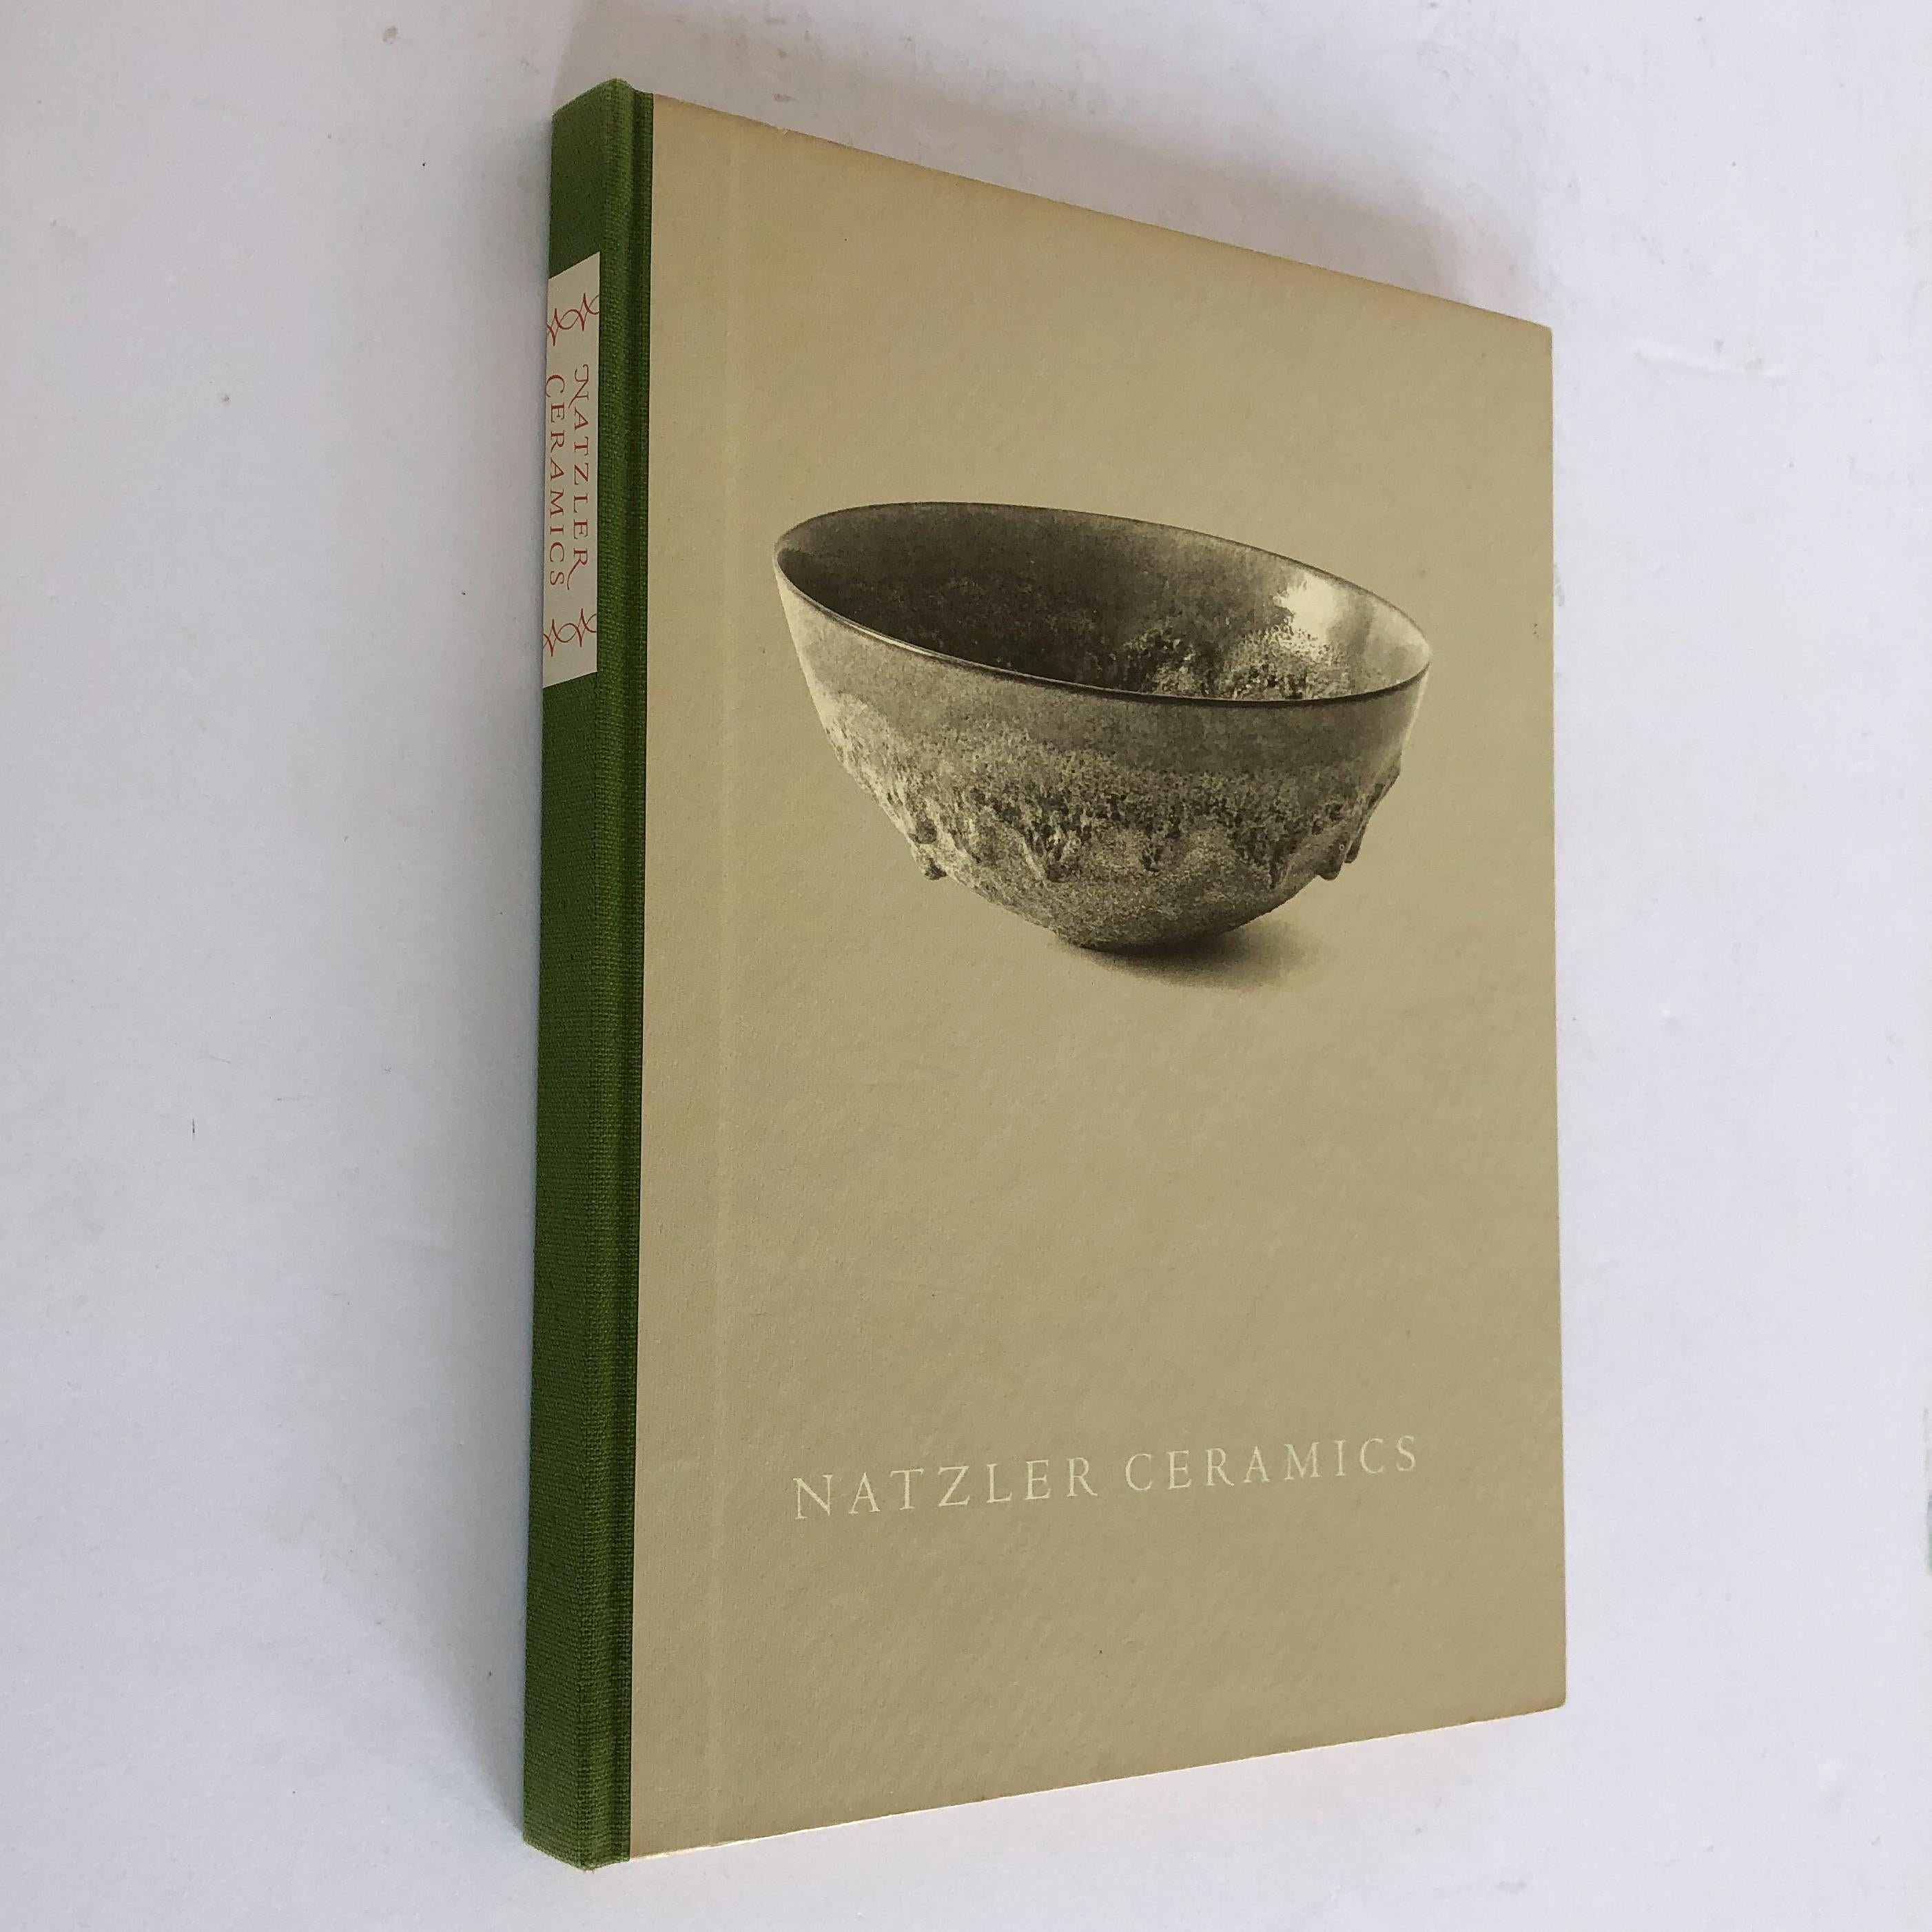 Natzler ceramics from the collection of Mrs. Leonard M. Sperry. Published by the Los Angeles County Museum of Art, 1968. Limited edition hardcover presentation copy, #122/500, specially bound. 81 pages of photos in color and b/w. Signed by both